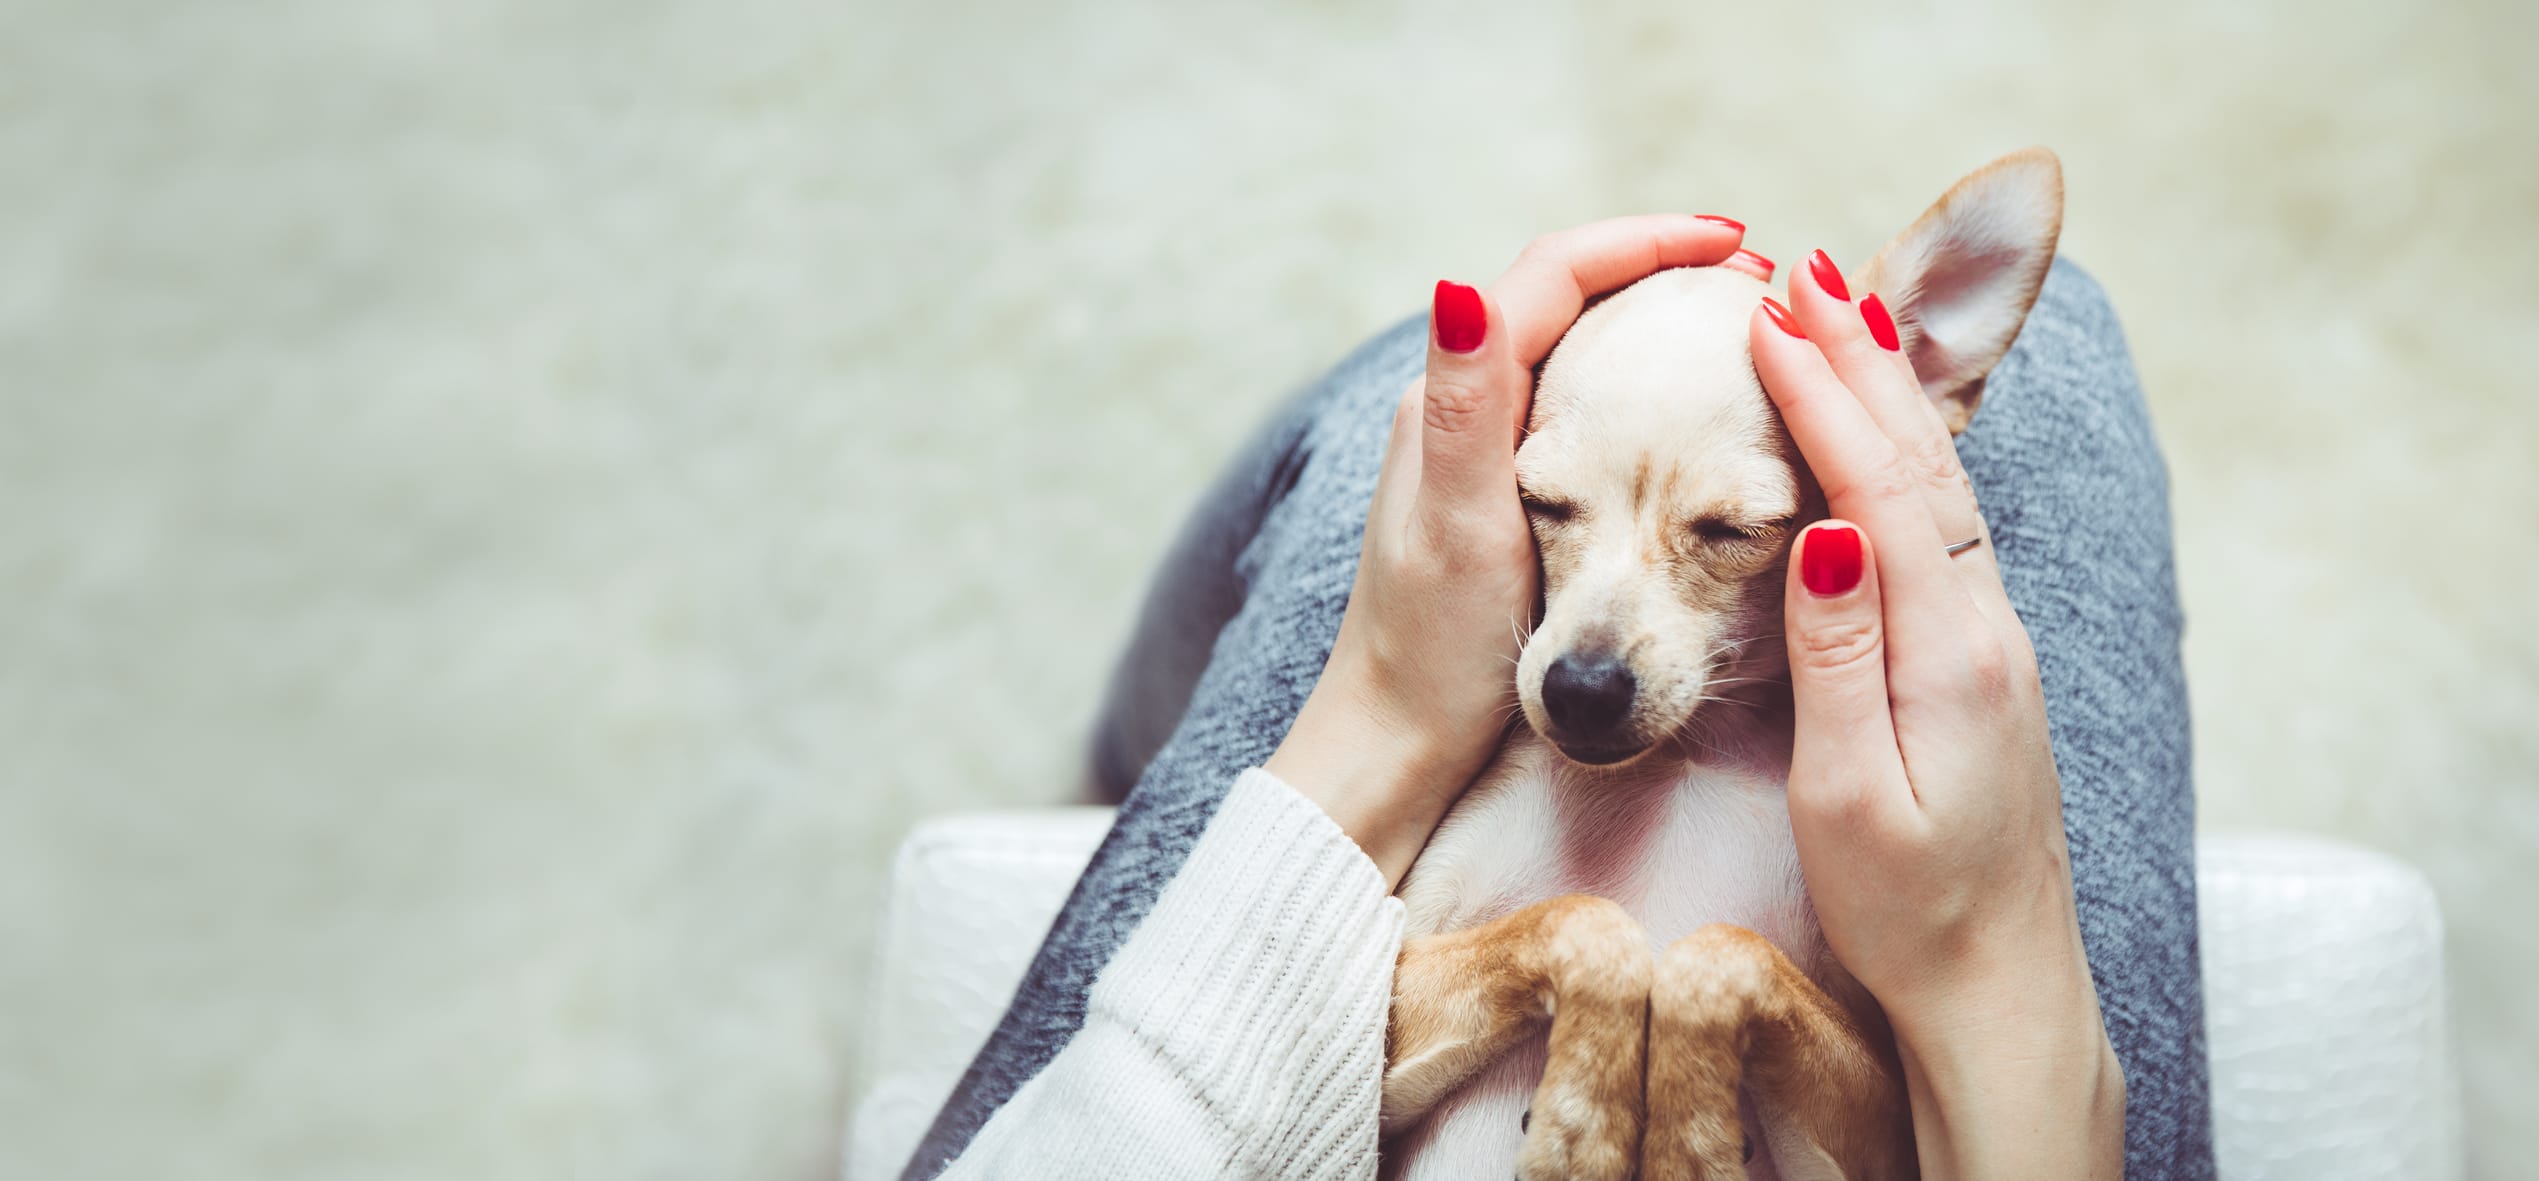 person with bright red nail polish gently holds a chihuahua in her lap, on its back. The dog looks relaxed.